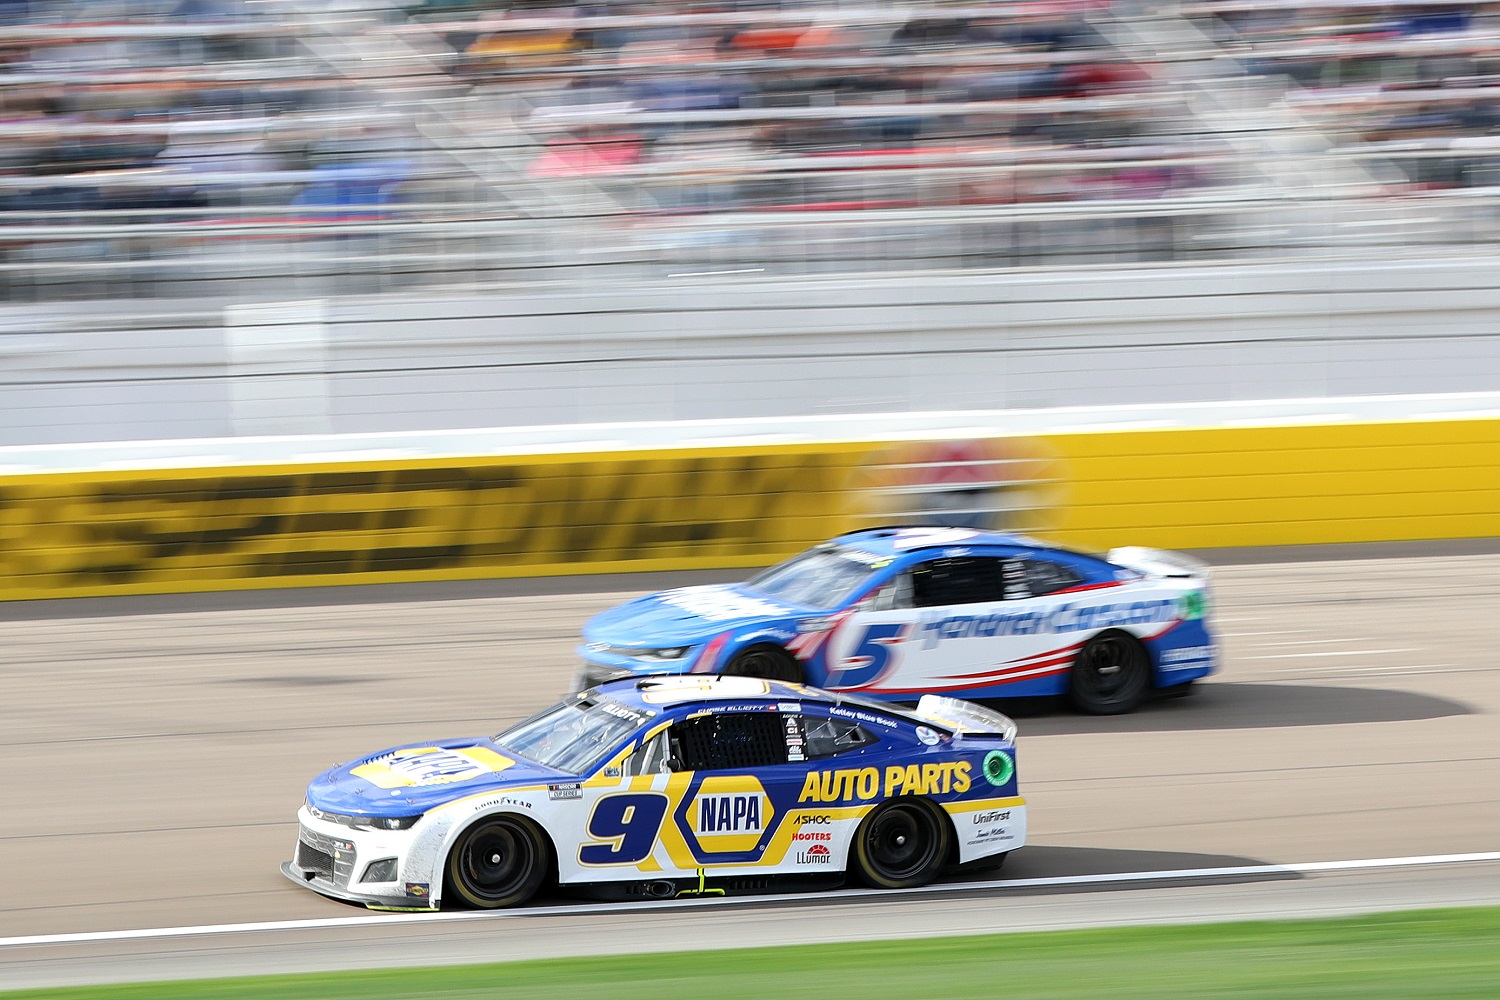 Chase Elliott and Kyle Larson race during the NASCAR Cup Series Pennzoil 400 at Las Vegas Motor Speedway on March 06, 2022. | Meg Oliphant/Getty Images